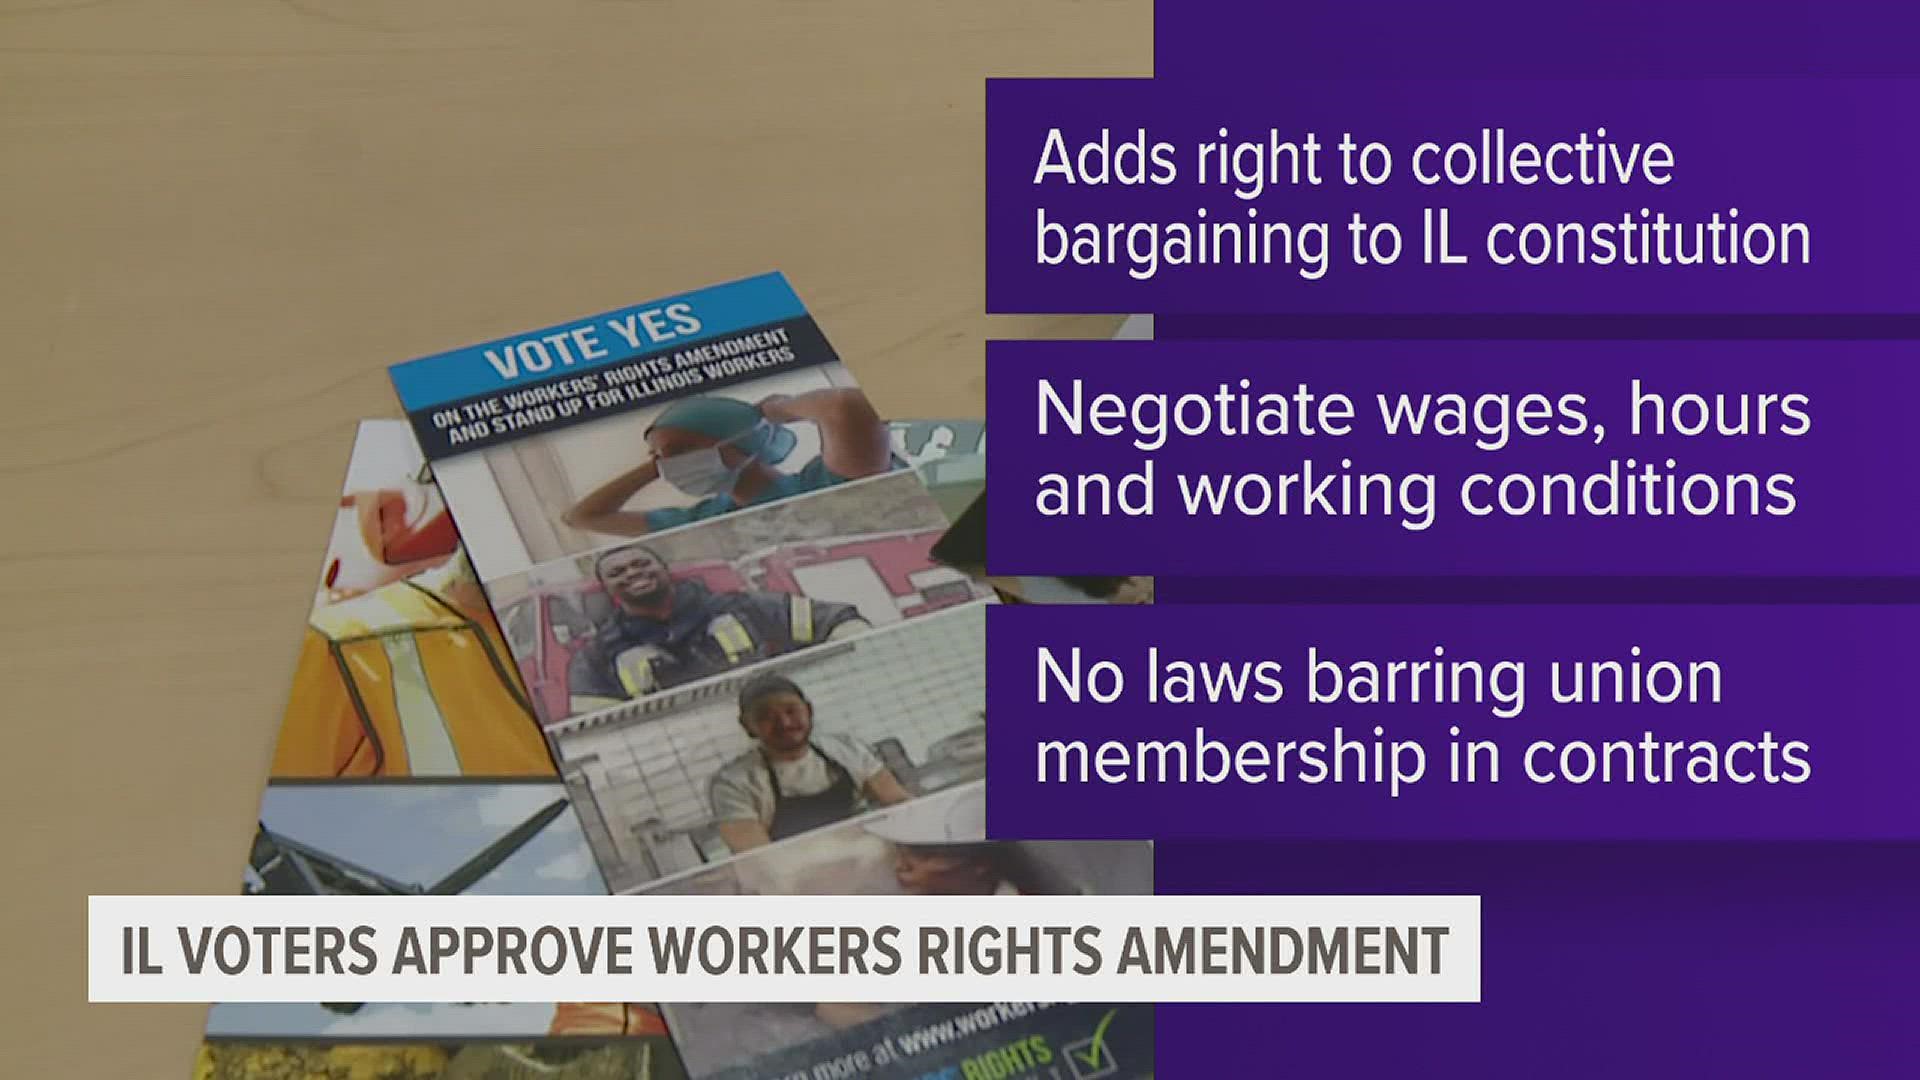 The measure gives more power to workers and unions, guaranteeing the right to bargain collectively.